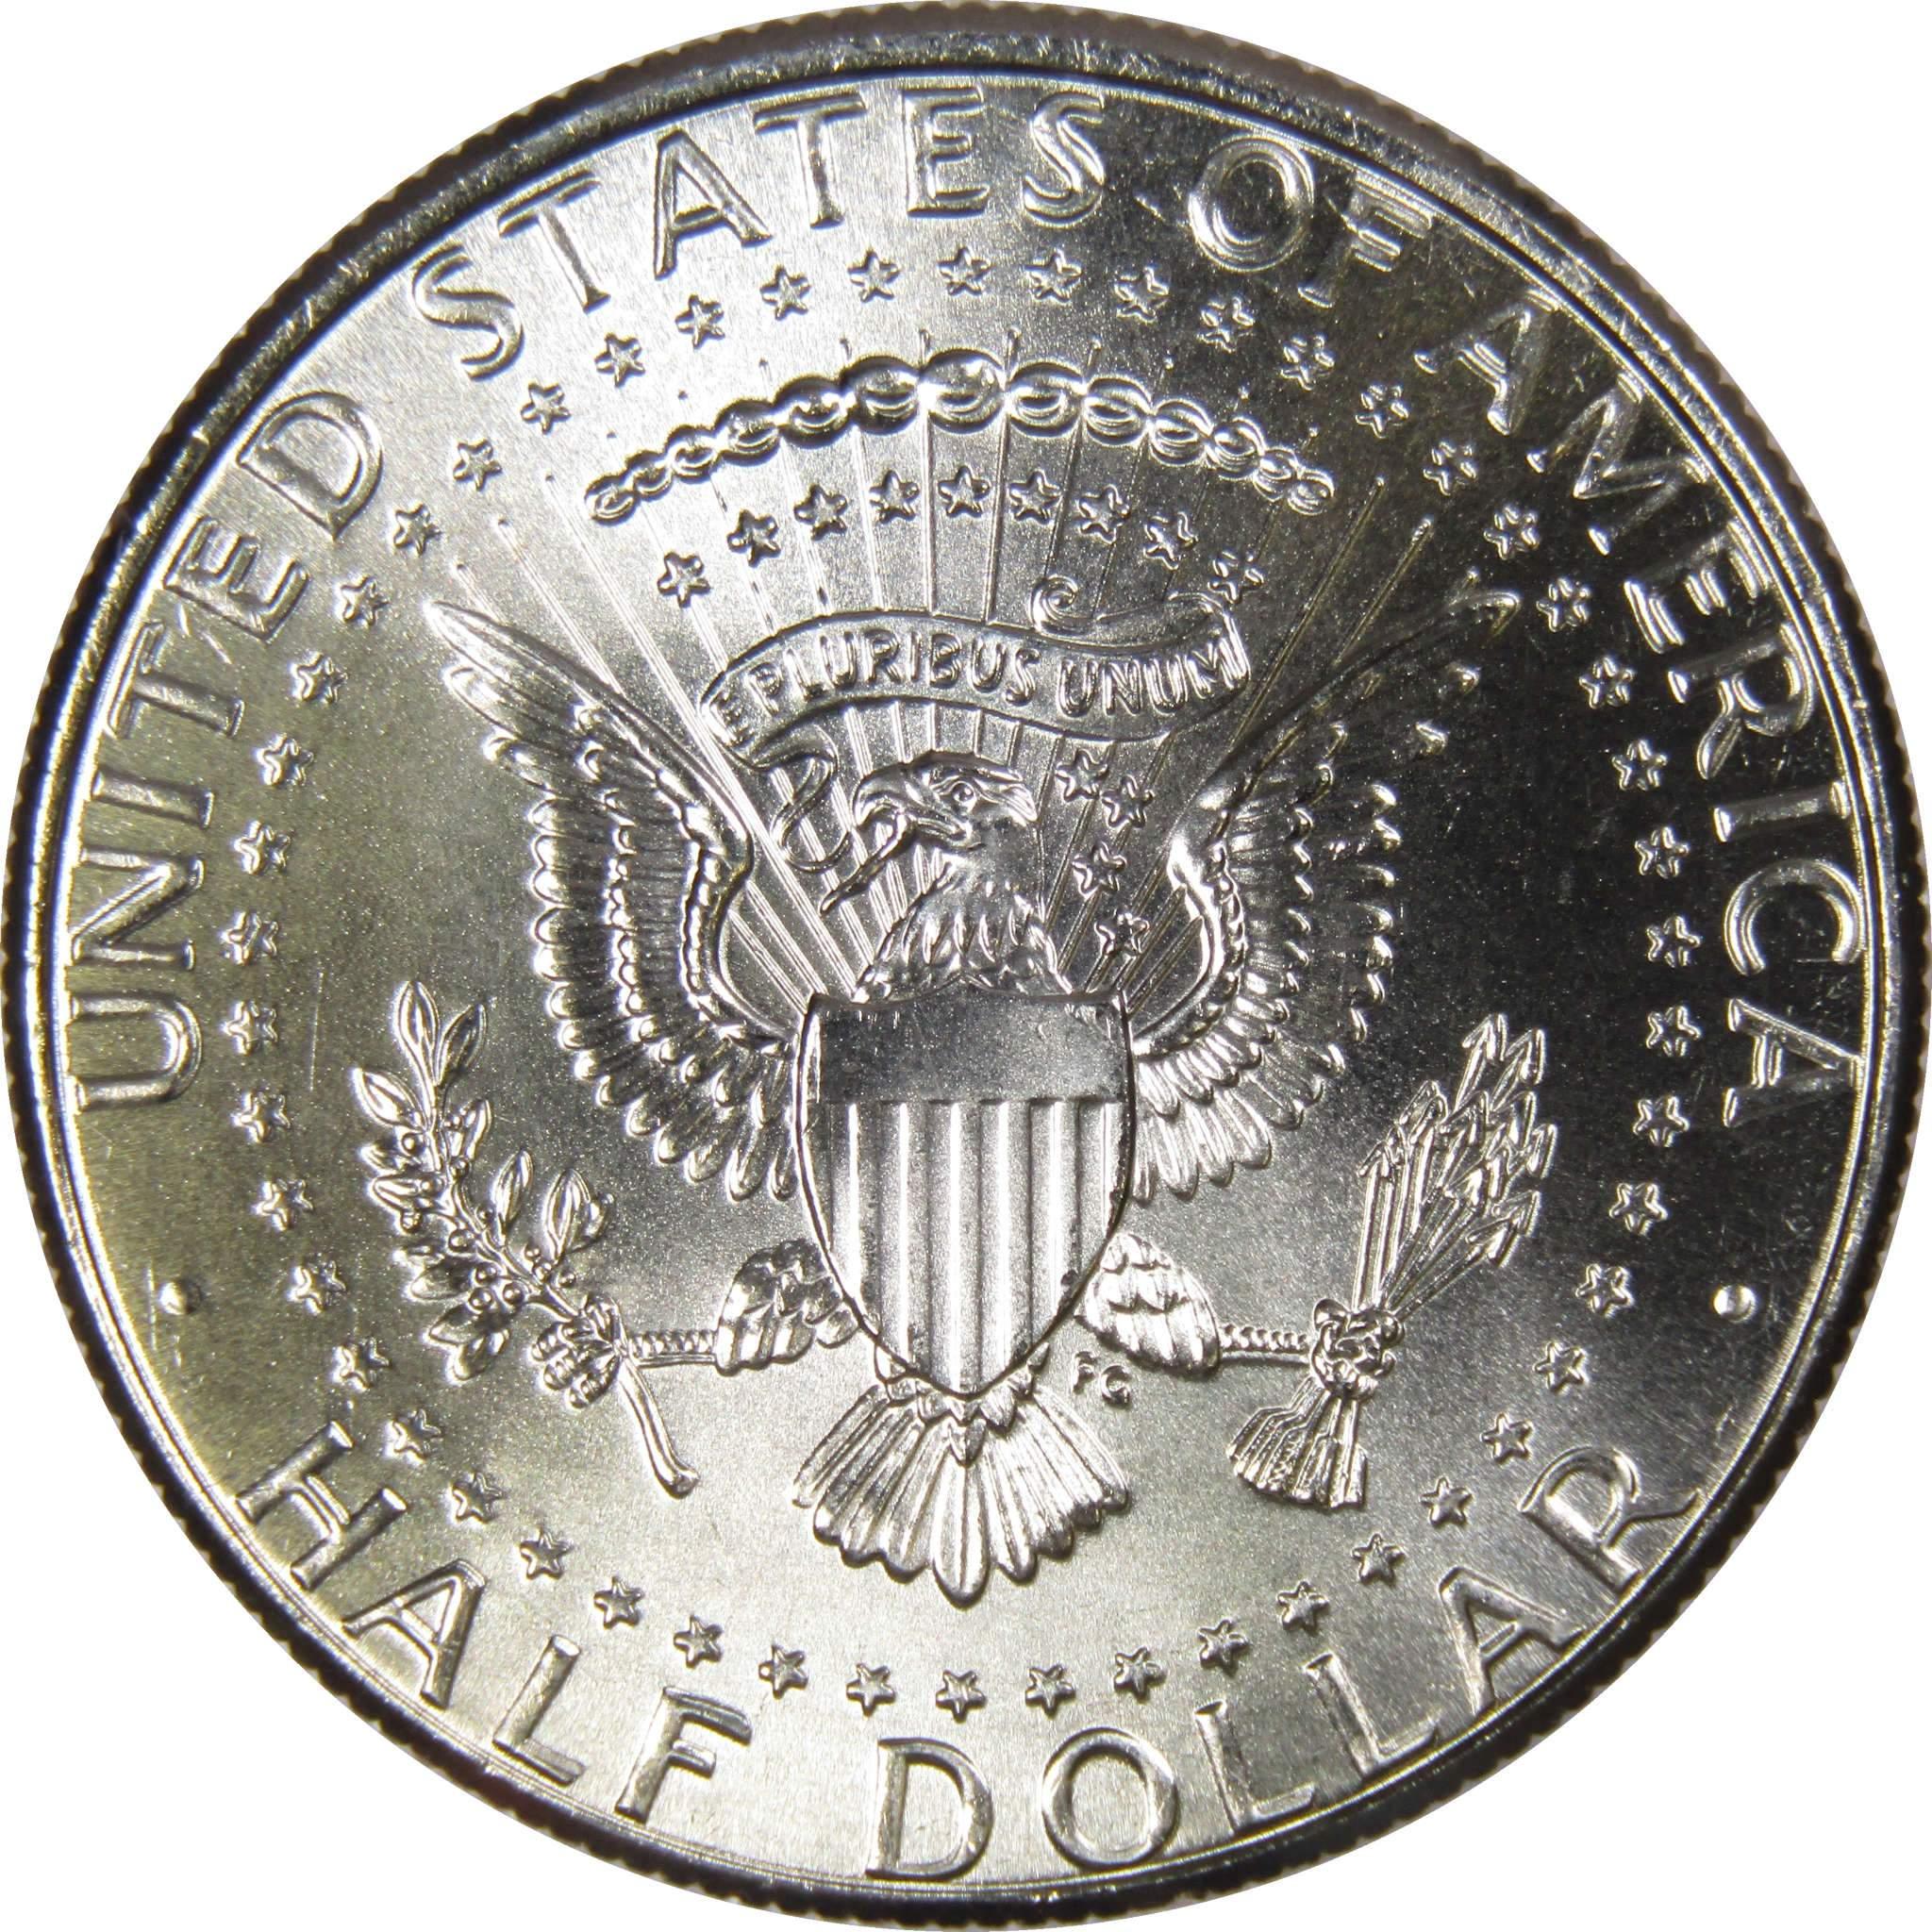 2012 D Kennedy Half Dollar BU Uncirculated Mint State 50c US Coin Collectible